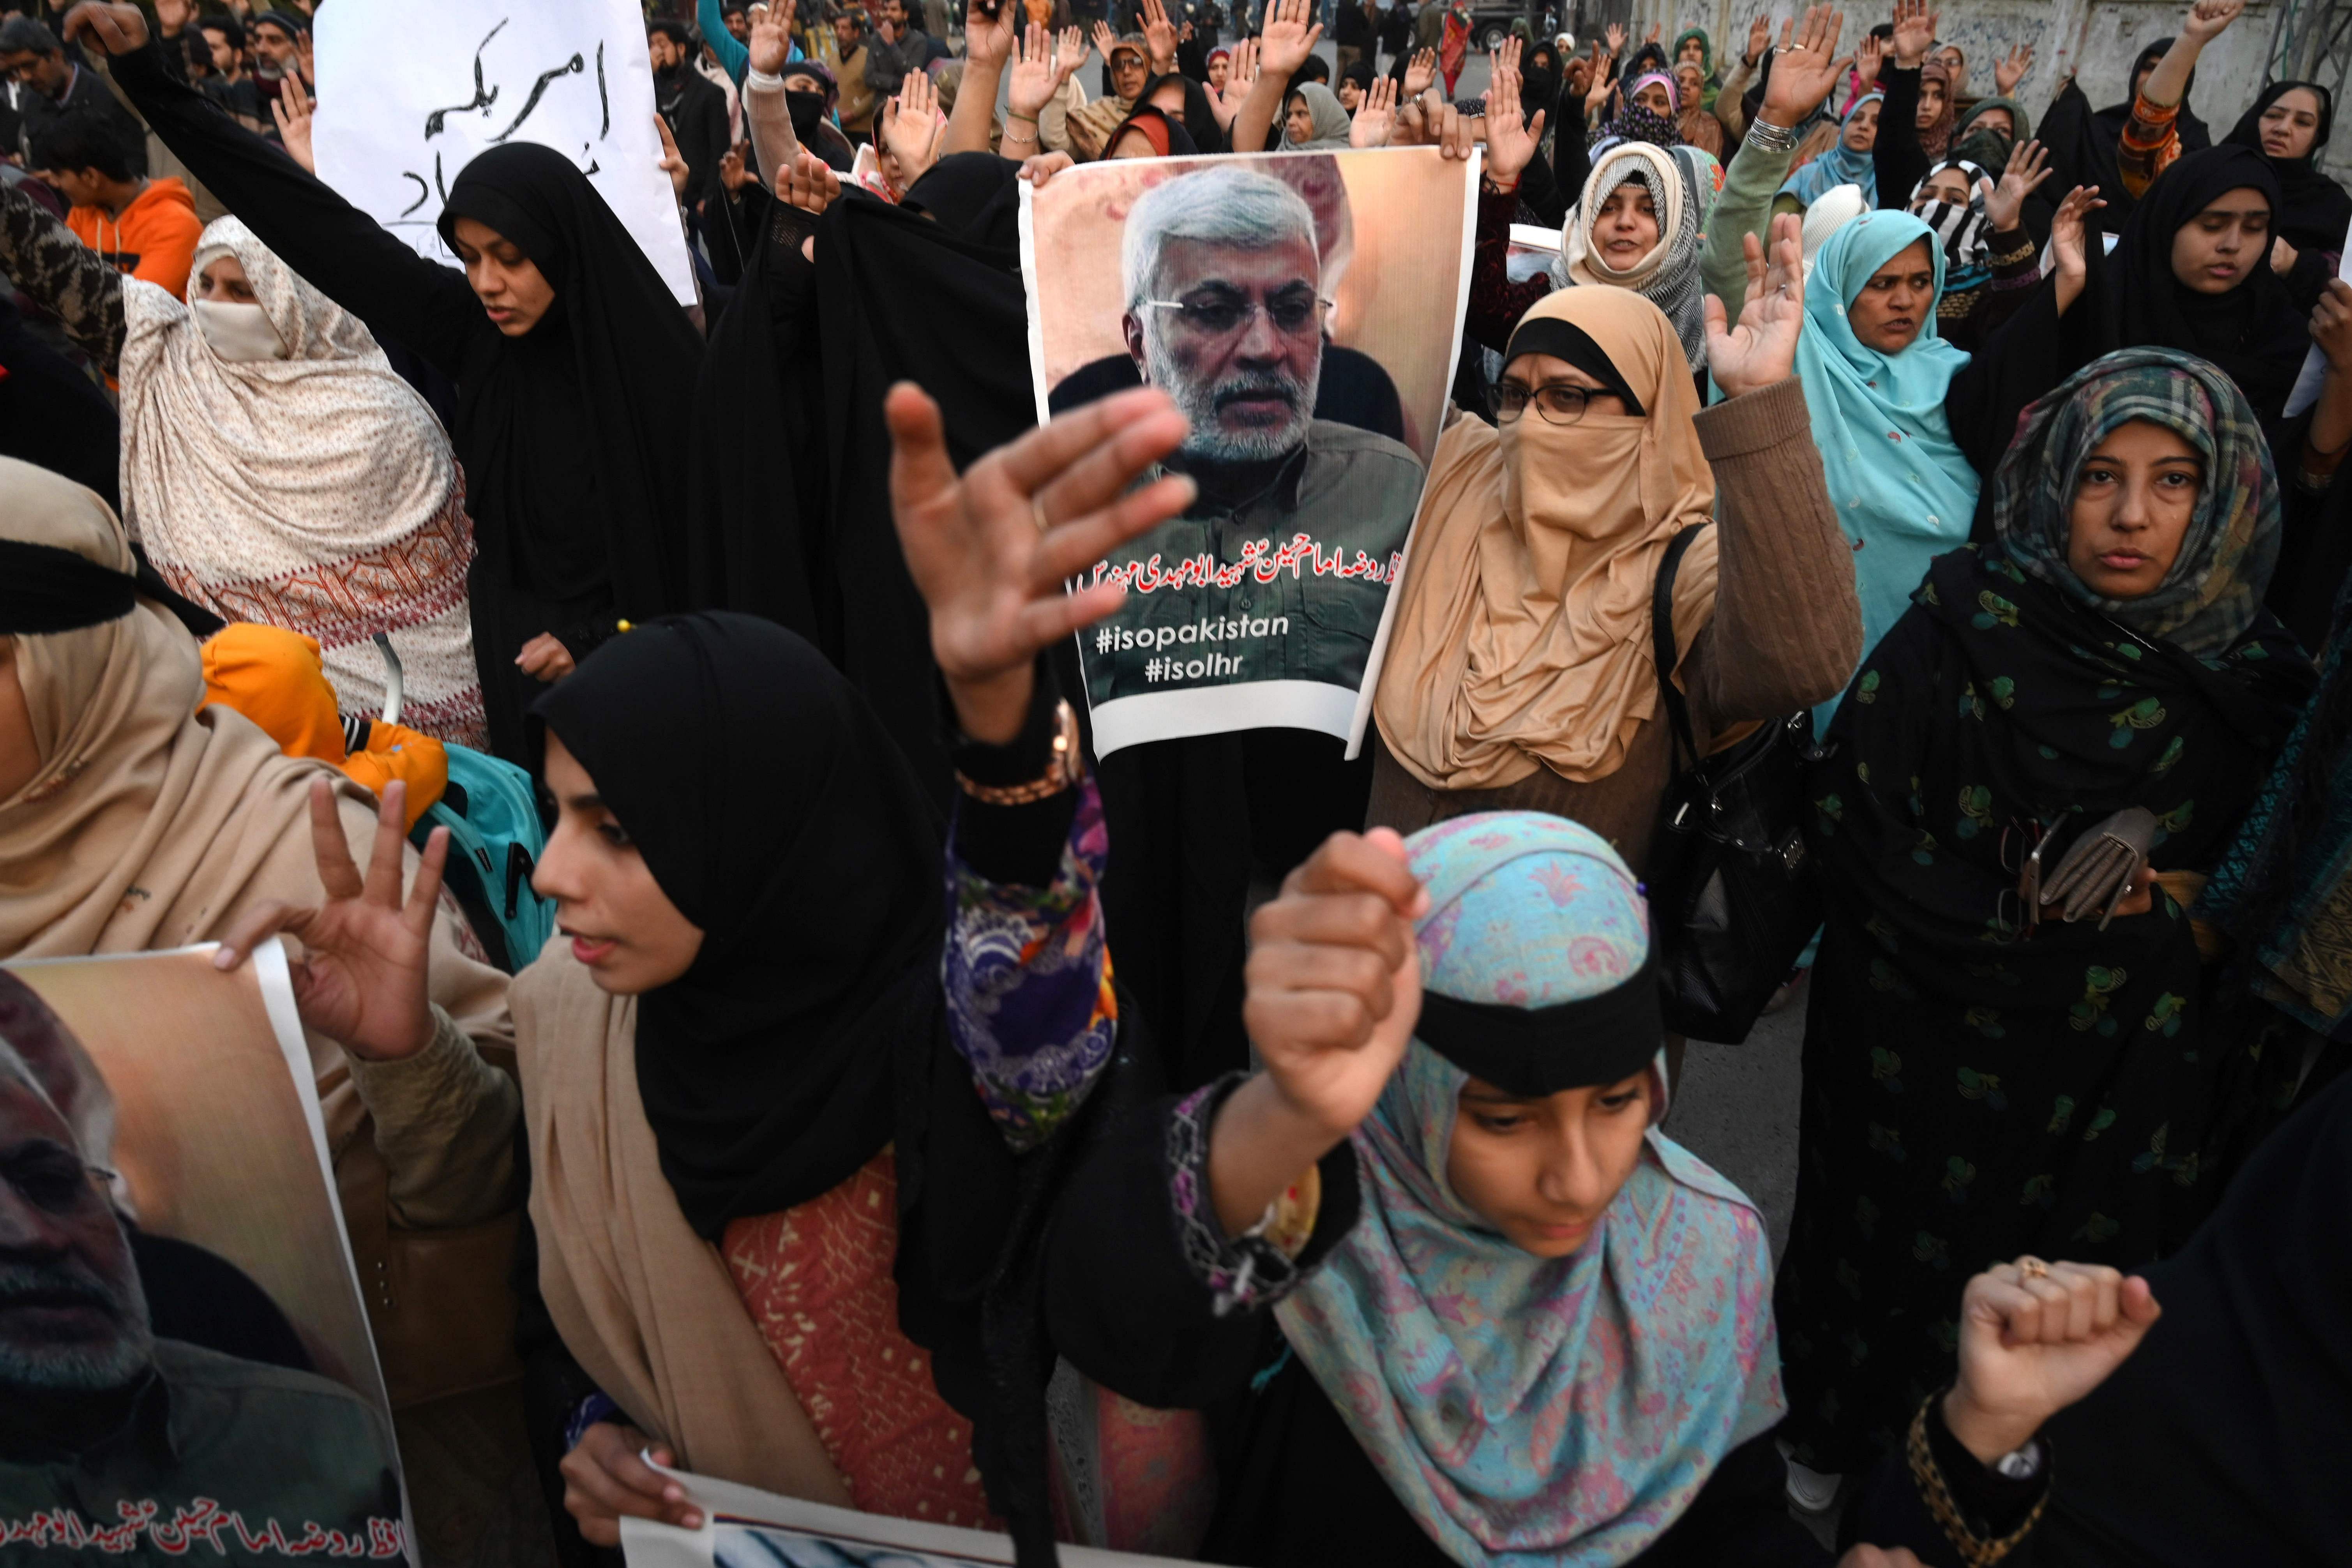 Protesters shout slogans against the United States during a demonstration following a US airstrike that killed top Iranian commander Qasem Soleimani in Iraq, in Lahore on January 3, 2020. - A US strike killed top Iranian commander Qasem Soleimani at Baghdad's international airport. (AFP Photo)